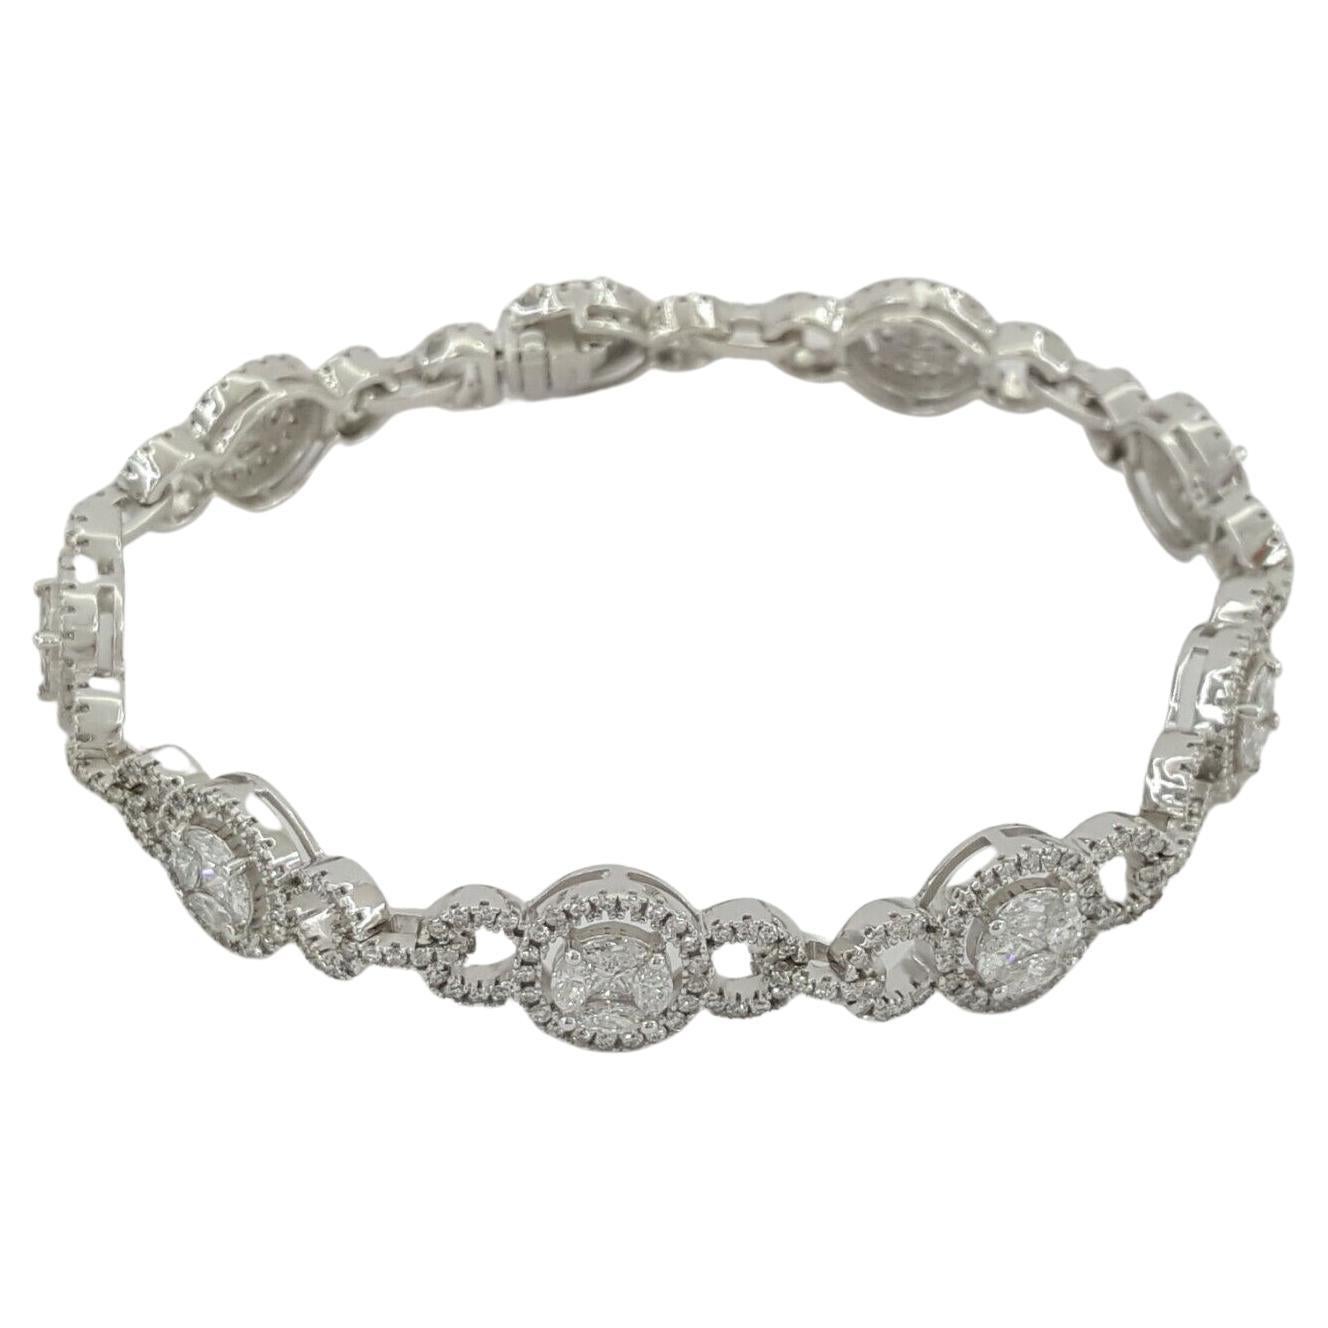 4 ct Total Weight 14K White Gold Round Brilliant, Marquise, & Princess Cut Diamond Cluster Tennis Bracelet. 